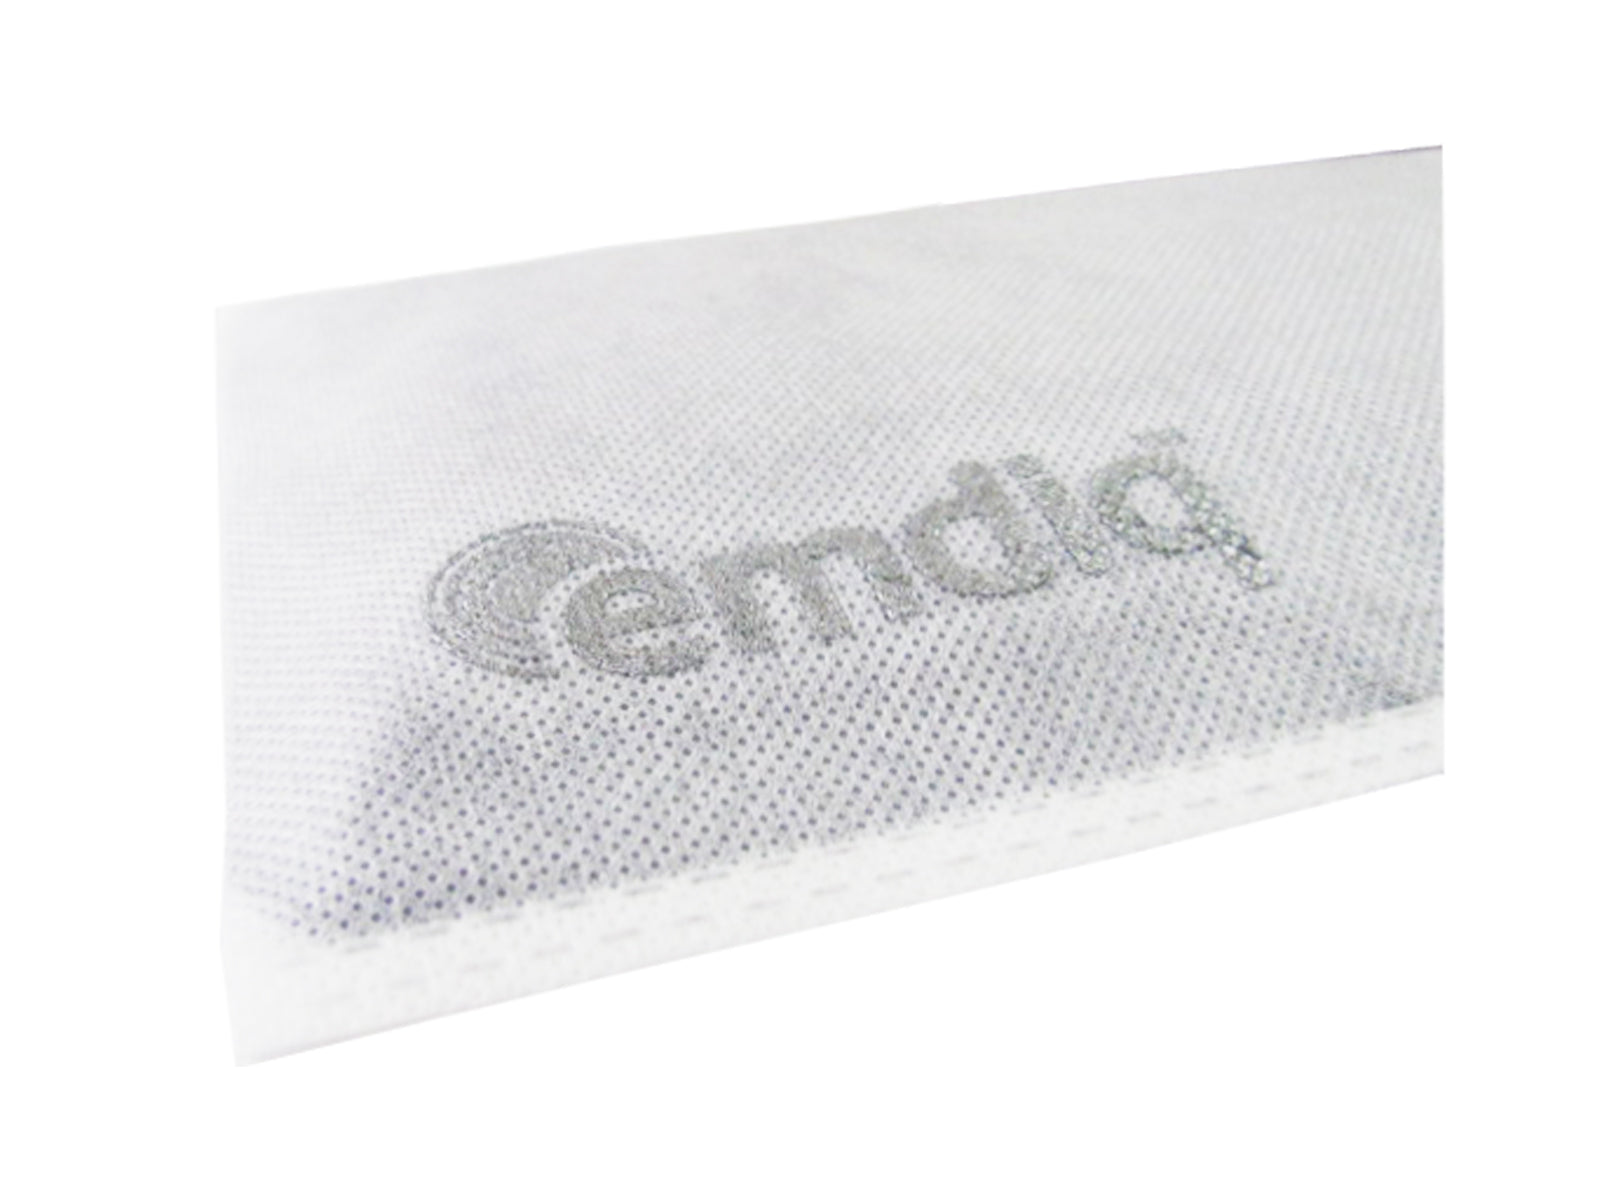 Emdiq Non-Woven Sleeve for Hot & Cold Gel Pack